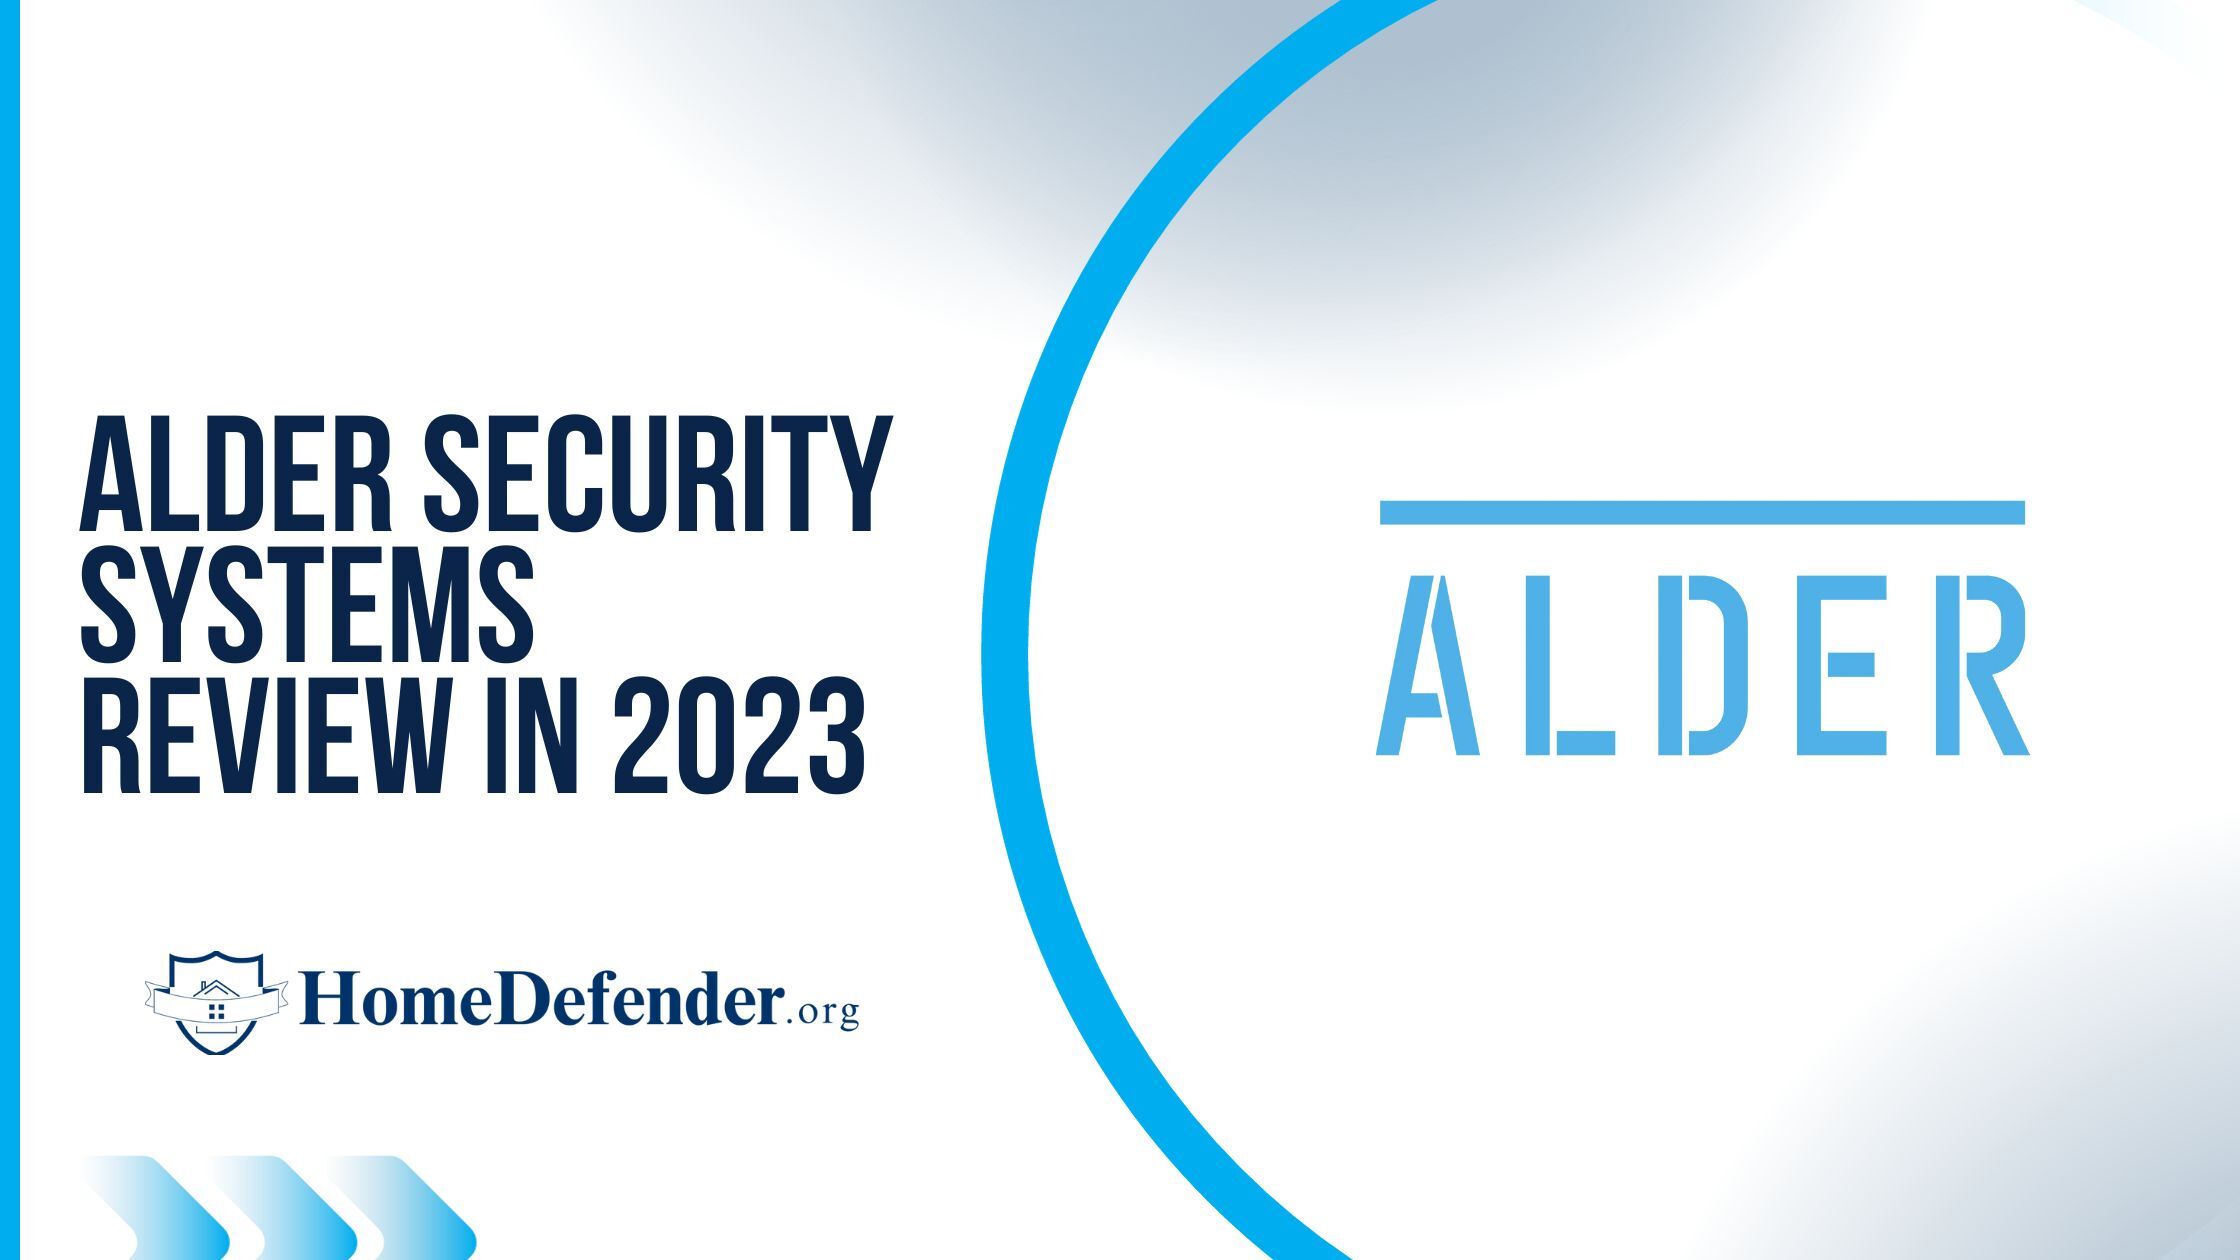 Alder Security Systems Review in 2023